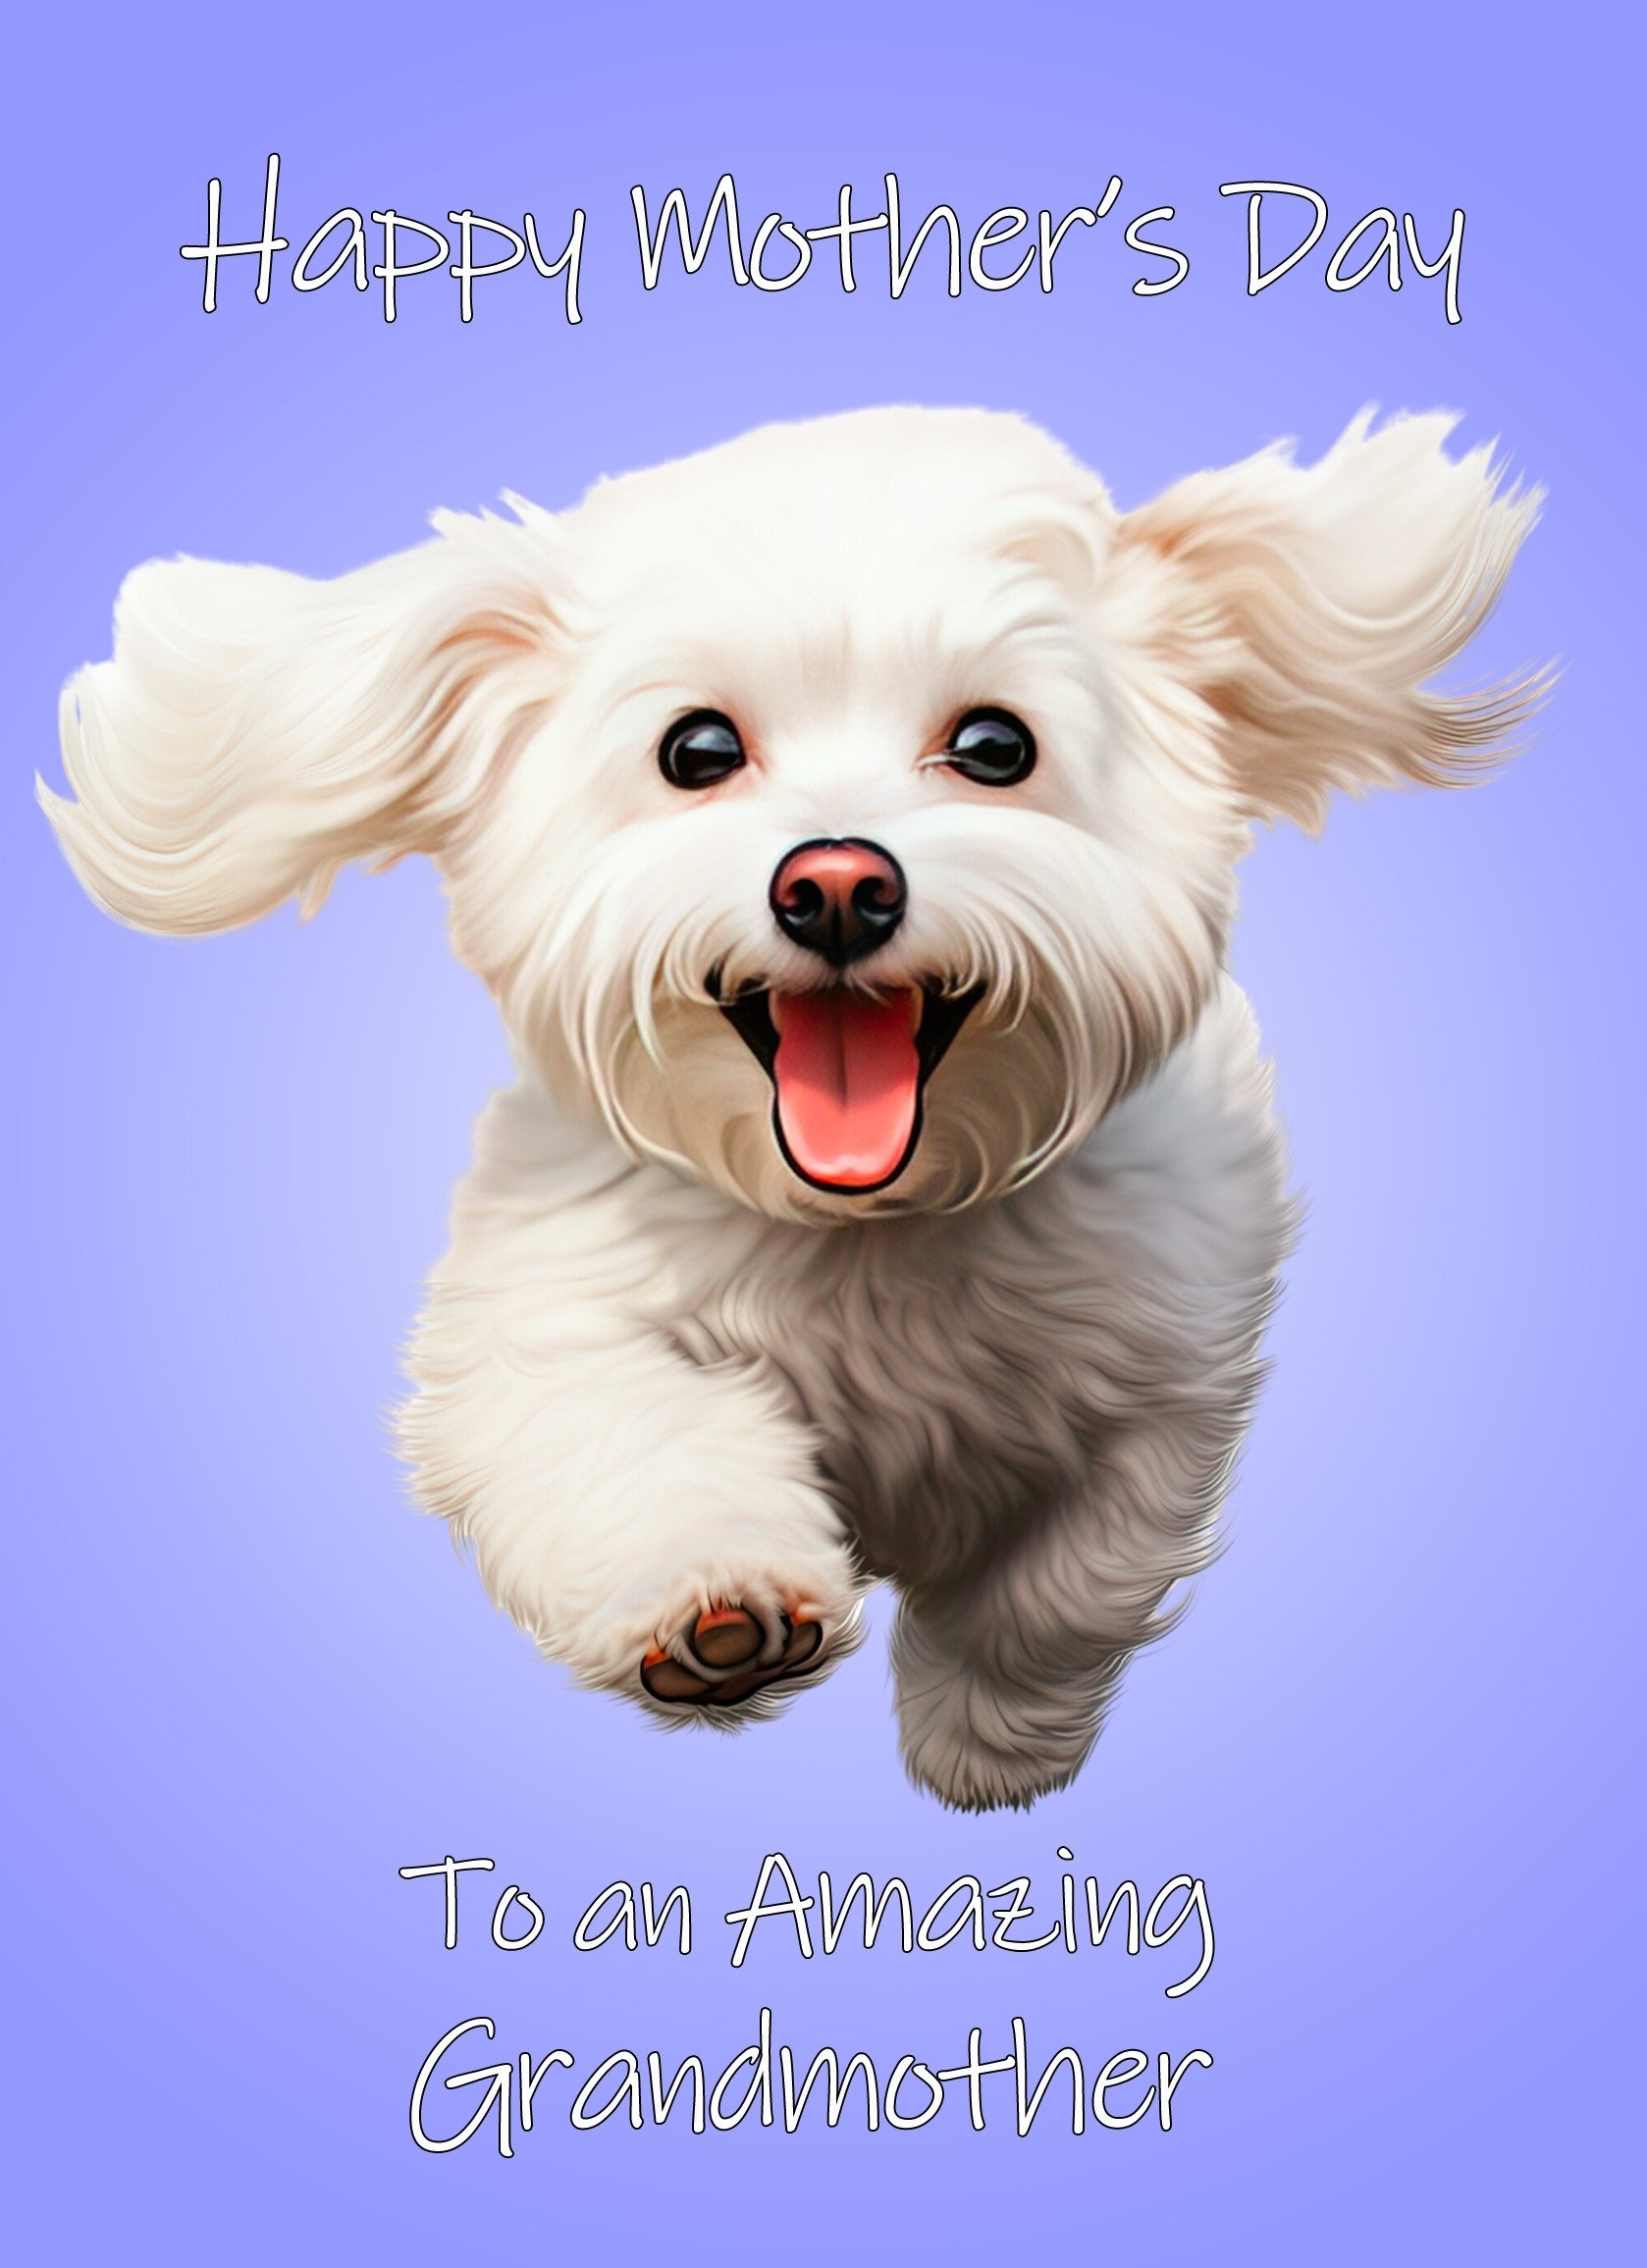 Bichon Frise Dog Mothers Day Card For Grandmother